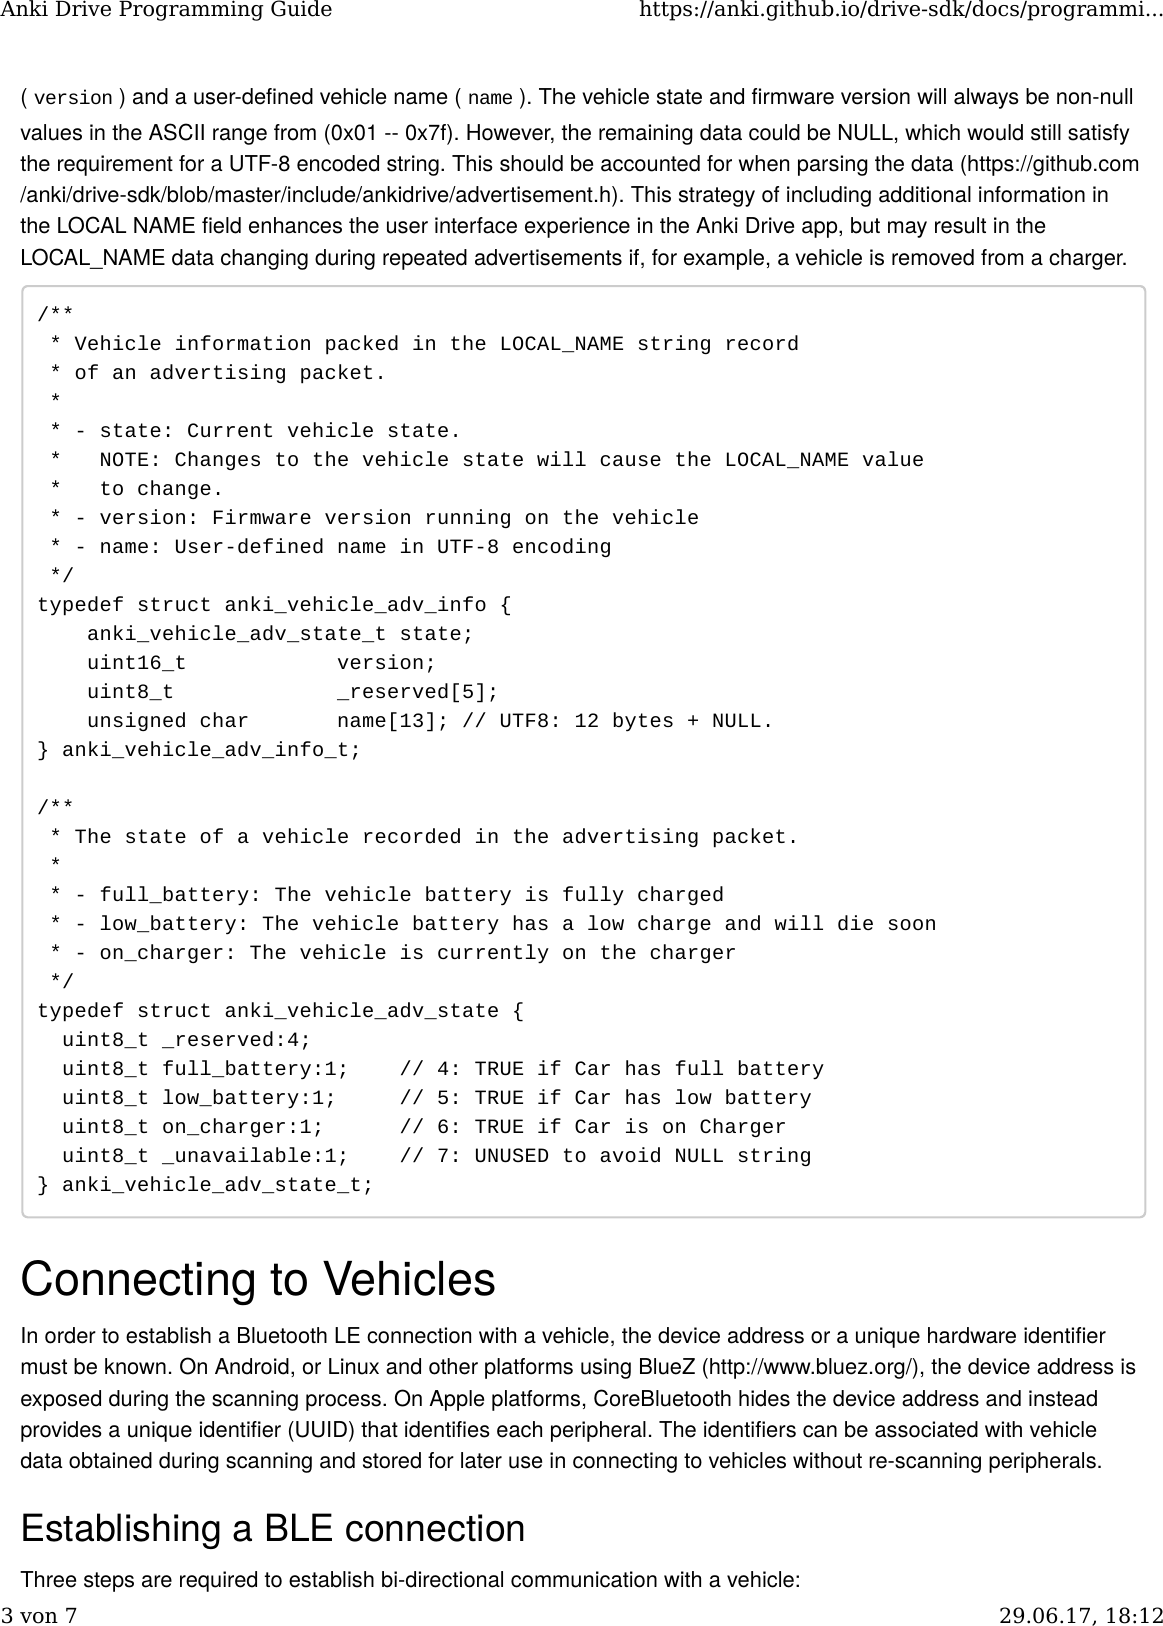 Page 3 of 7 - Anki-programming-guide